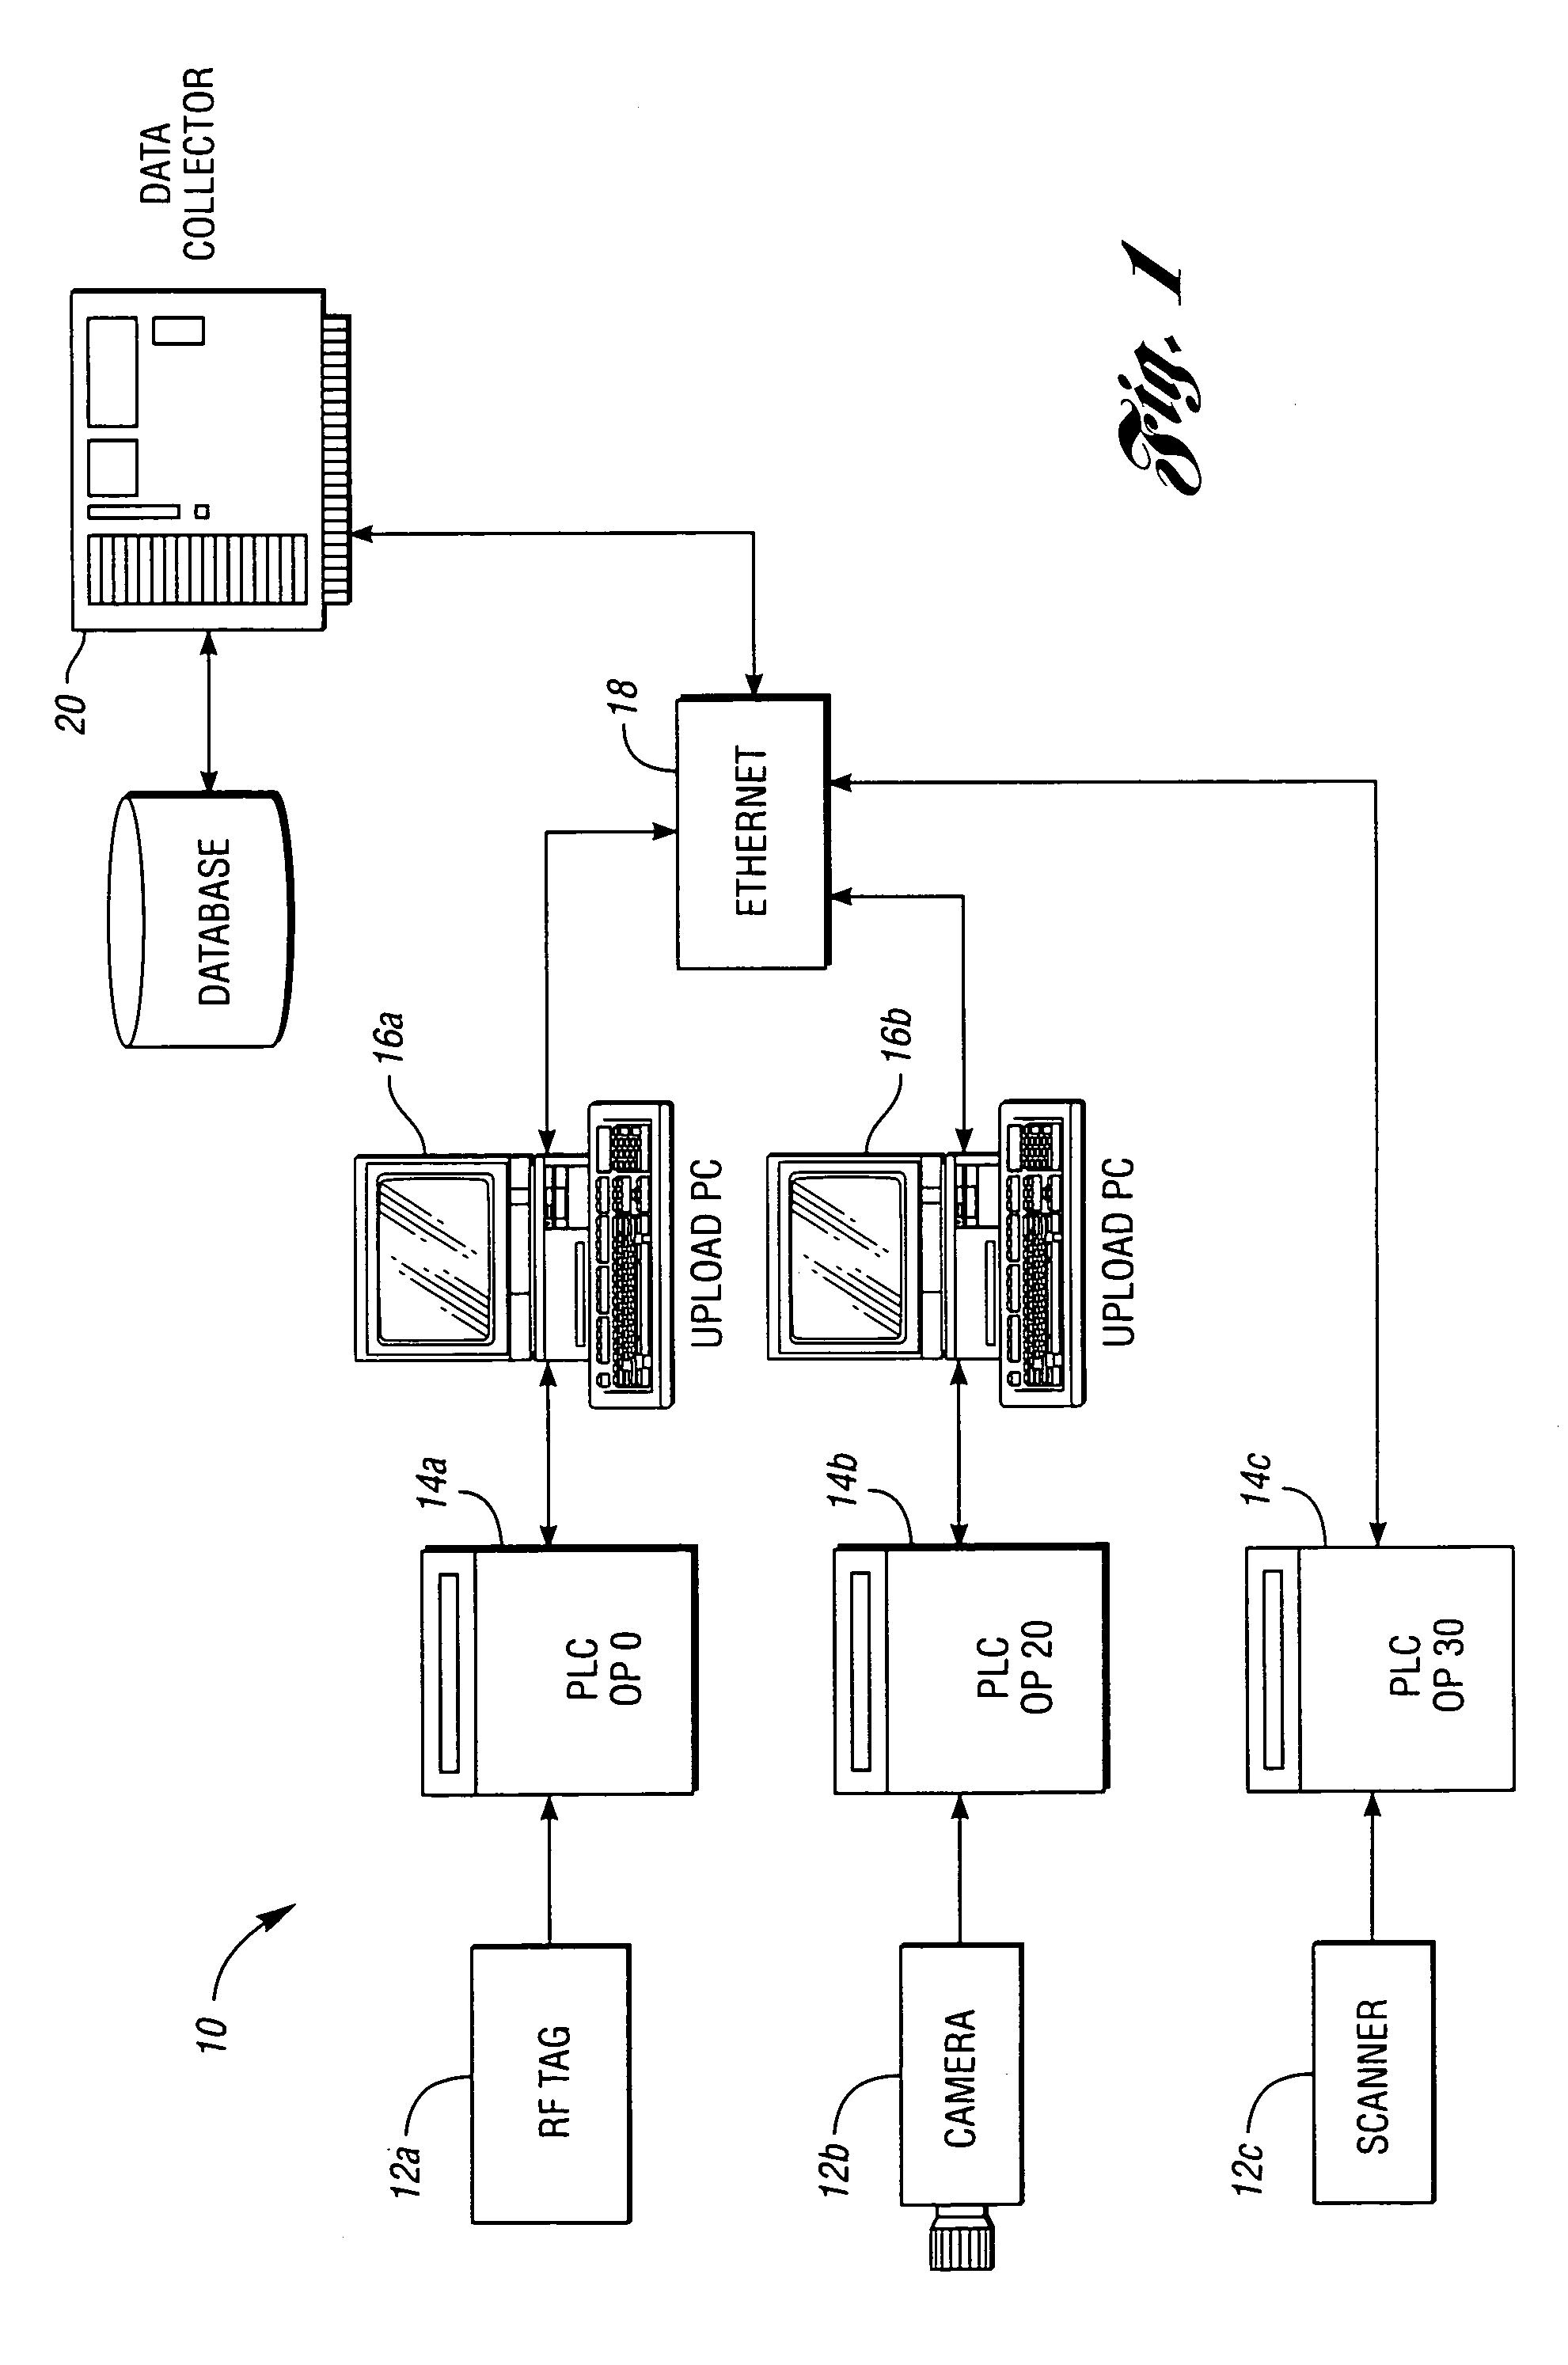 Method and system for automatically isolating suspect items in a manufacturing or assembly environment